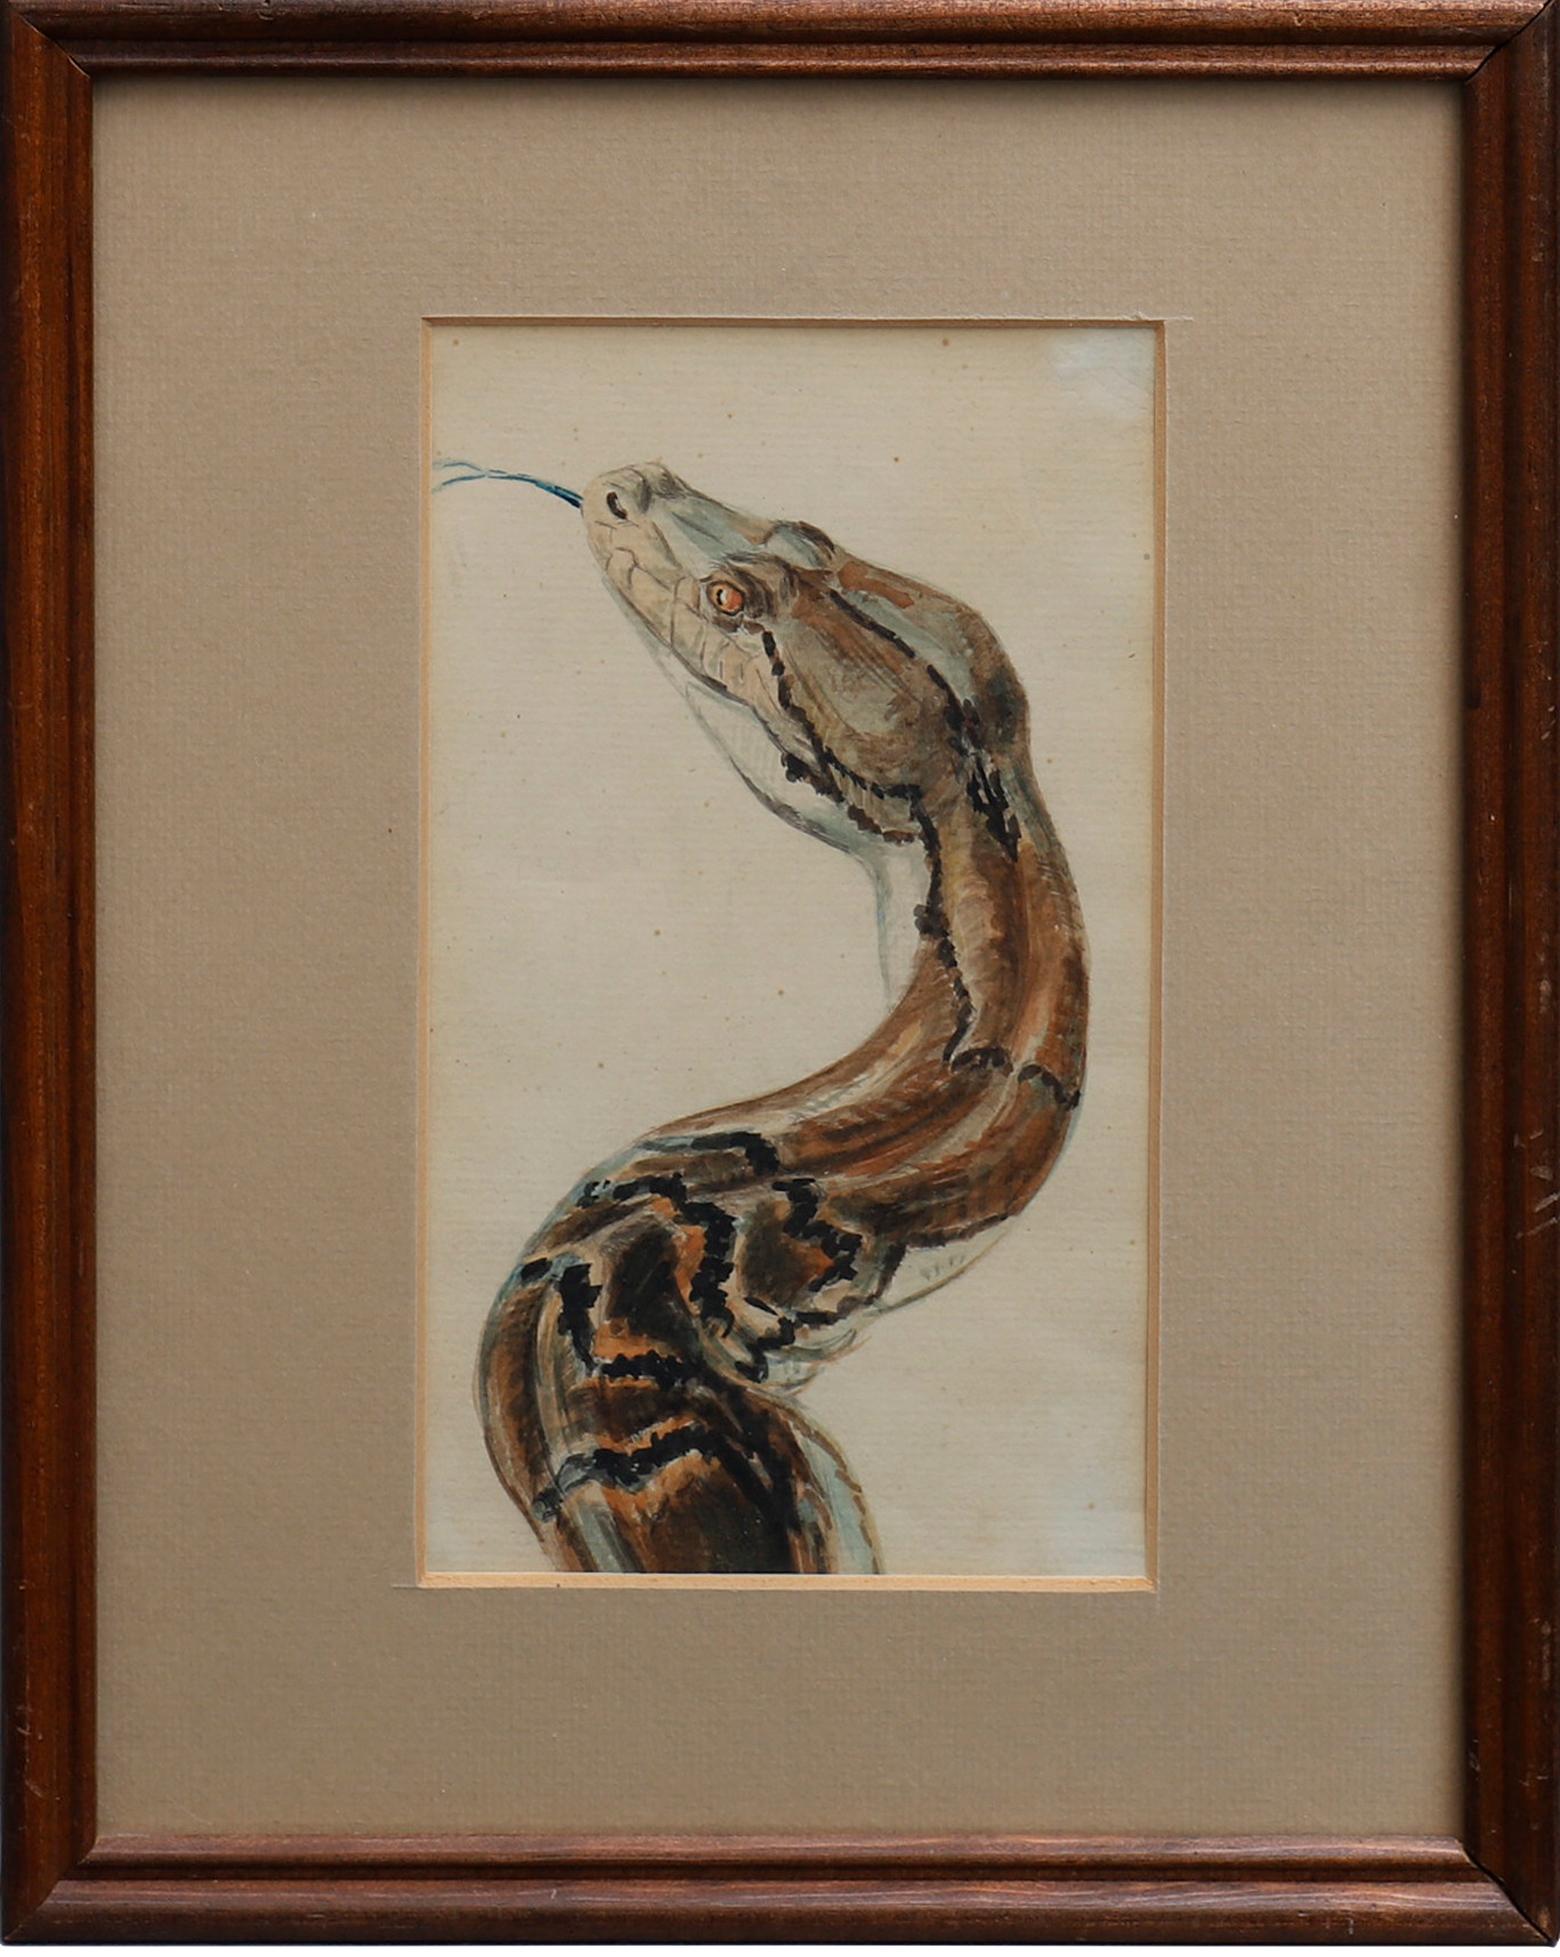 Aquarelle of a Reticulated Python from Copenhagen Zoo early 1900th hundred
Text: Original watercolor. Preowned to the former director fot the Copenhagen Zoo, Axel Rewentlow. 
The snake reticulated python (Malayopython reticulatus) is a species of